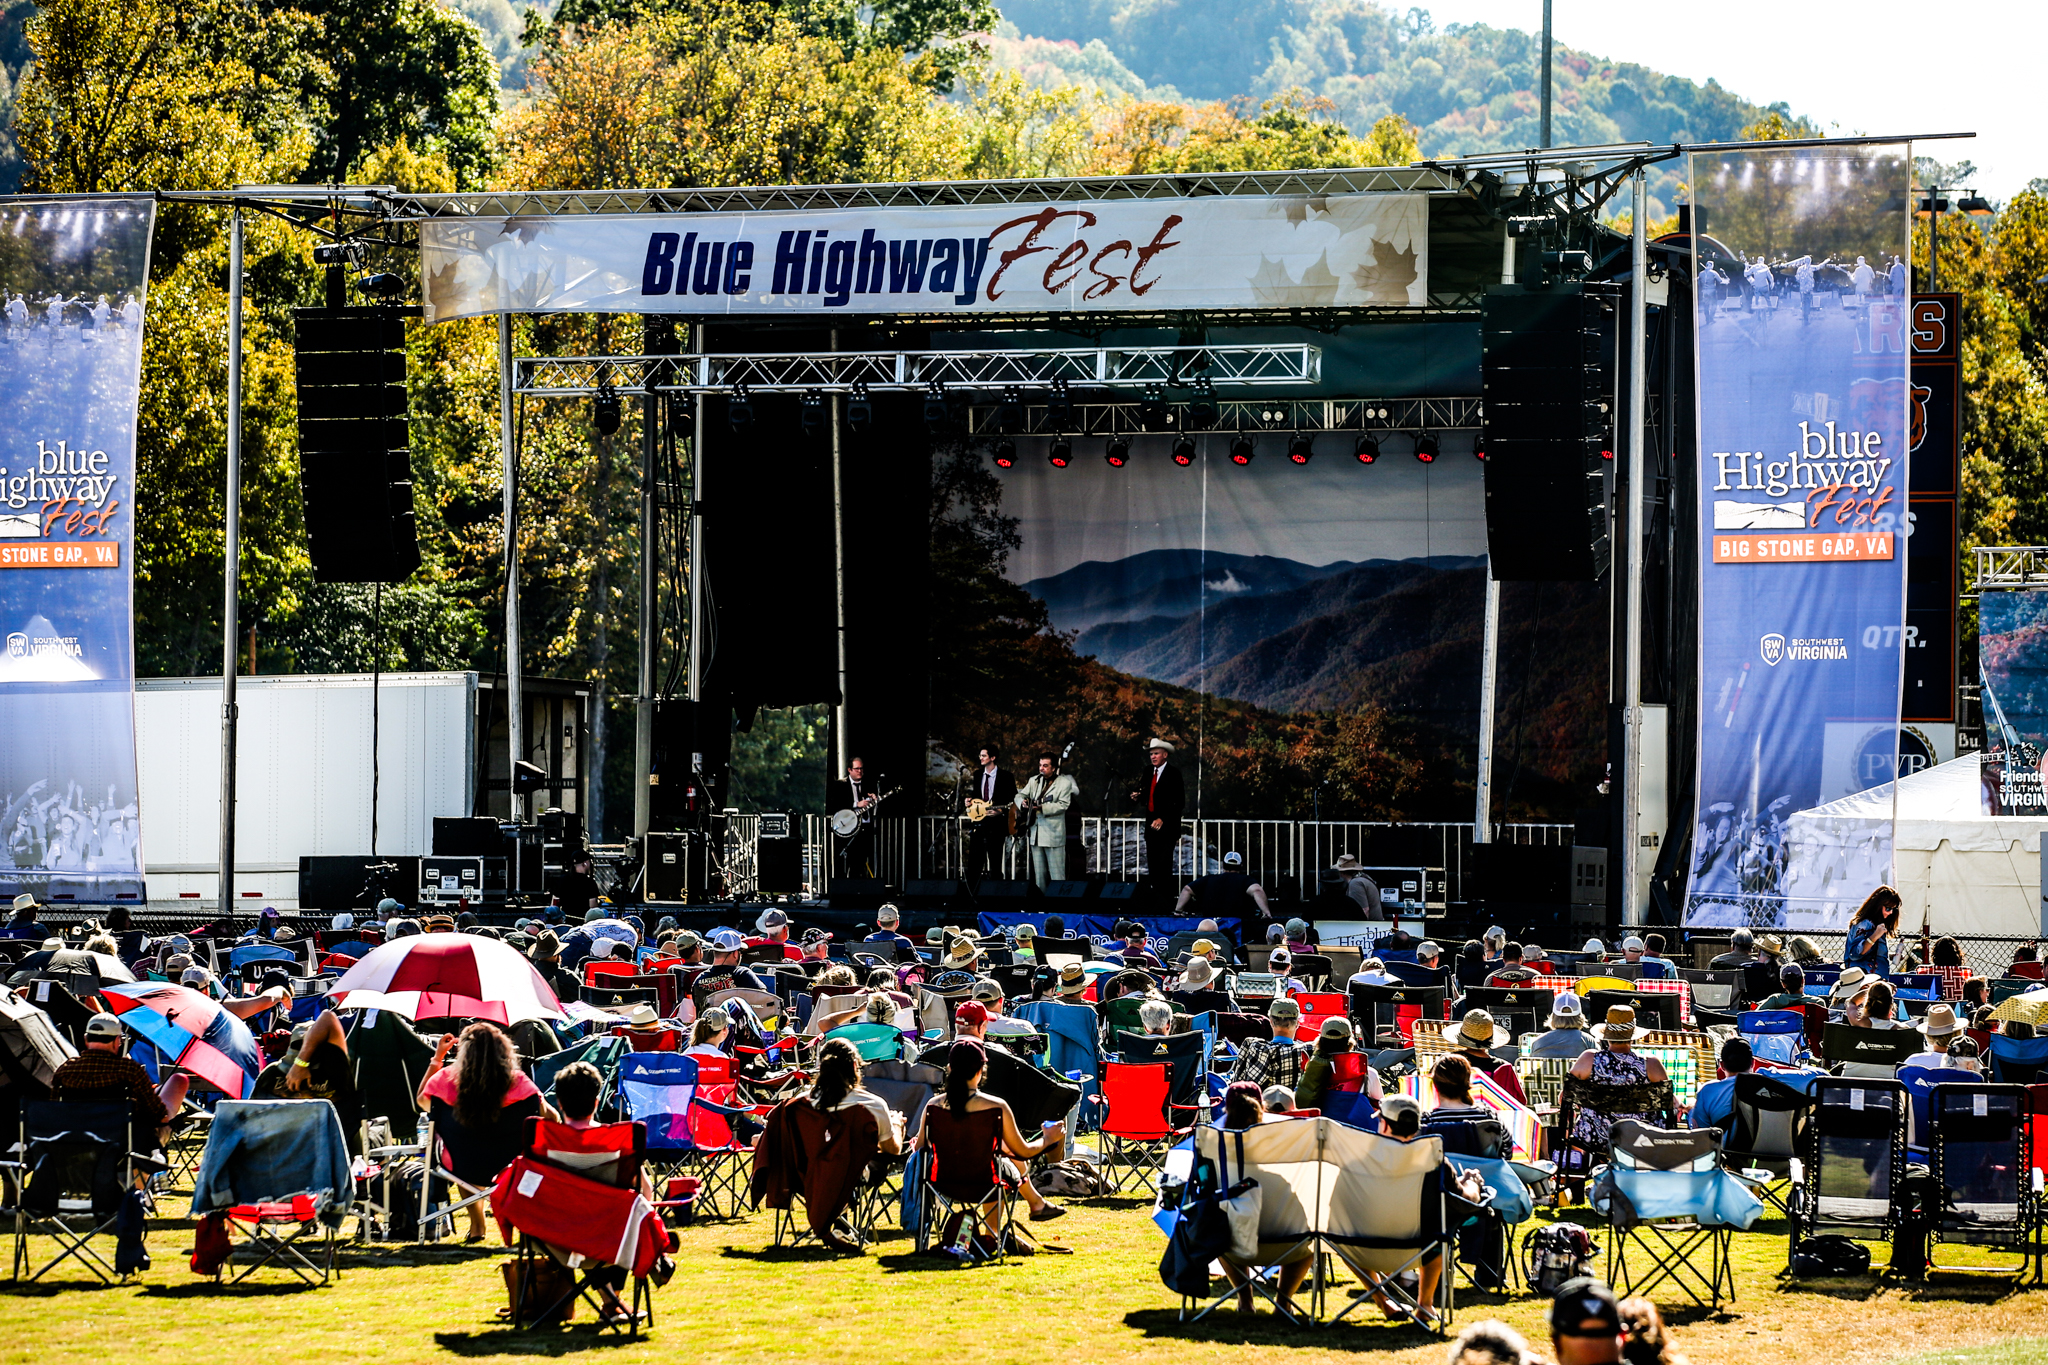 Blue Highway Fest is a awesome bluegrass festival in VA. 